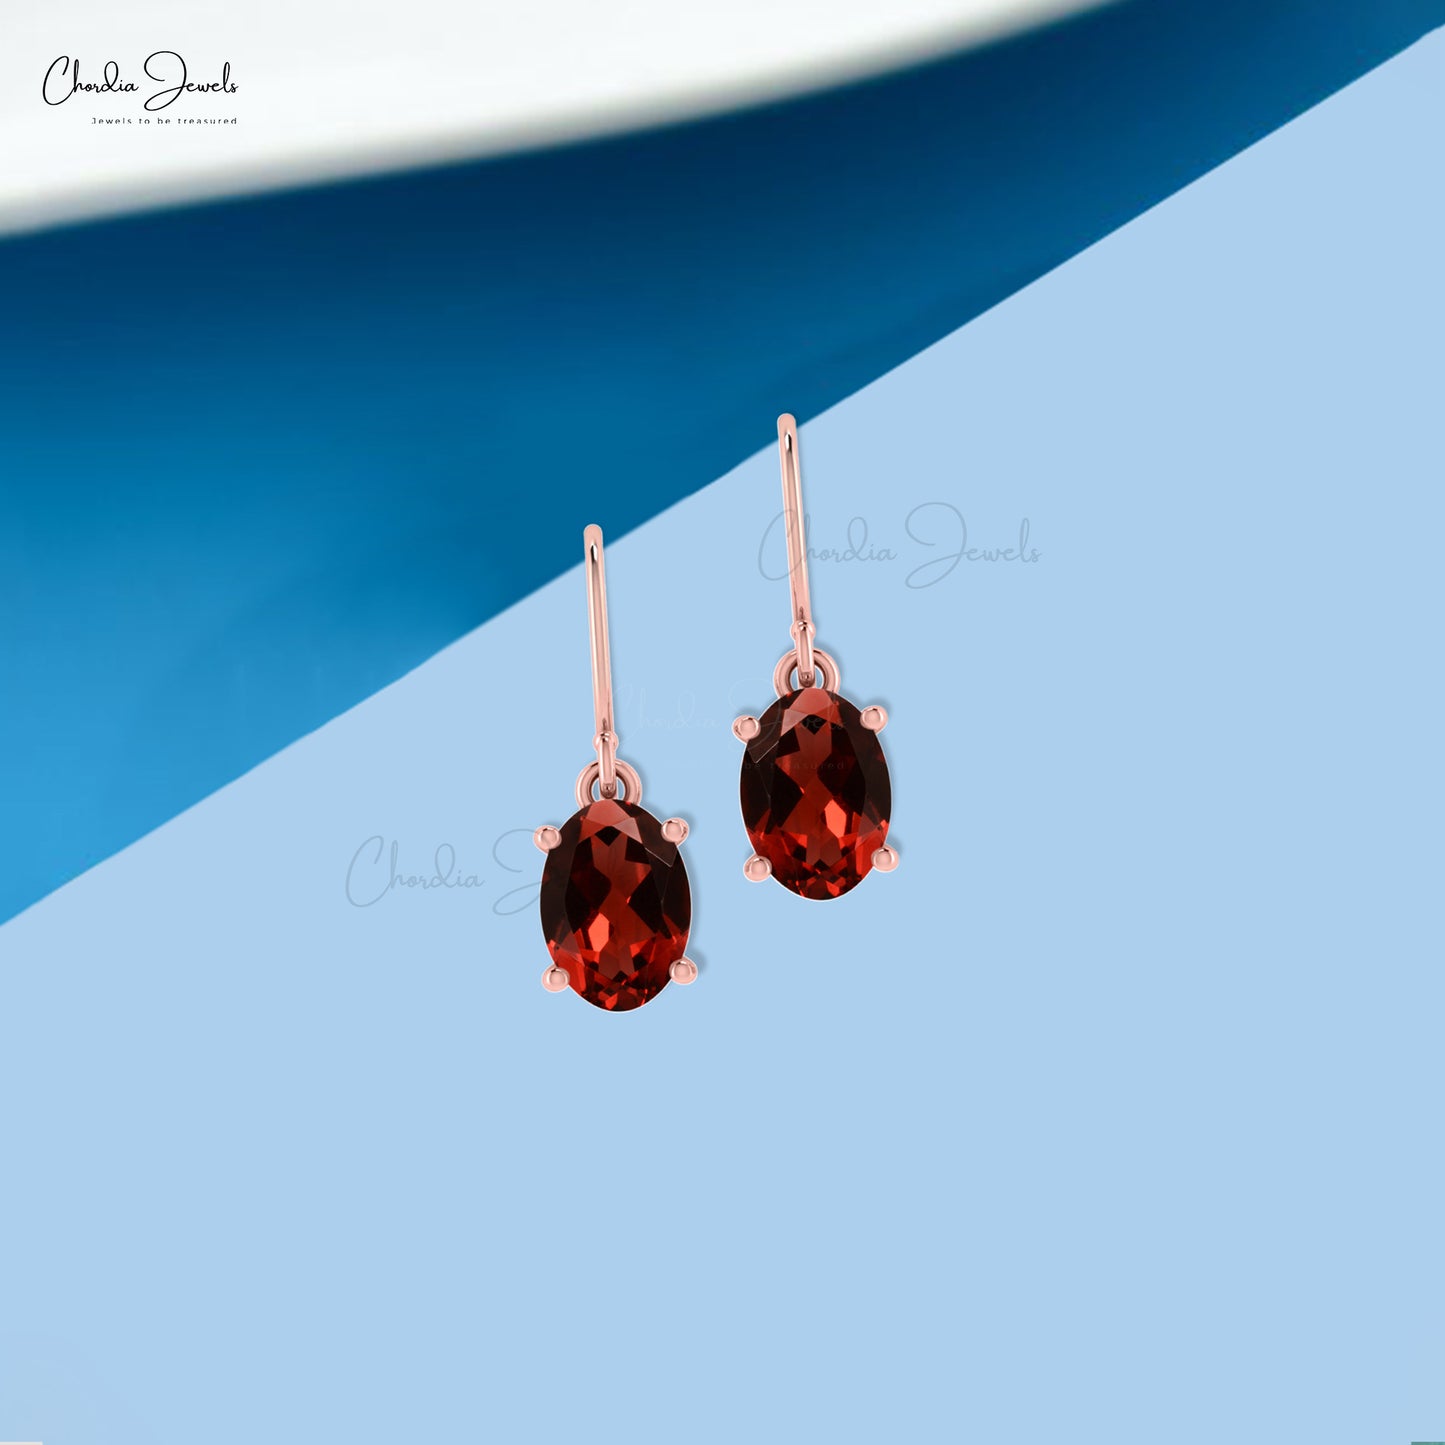 Load image into Gallery viewer, Oval Cut Garnet 14k Solid Gold Dangle Earrings With Fish Hook
